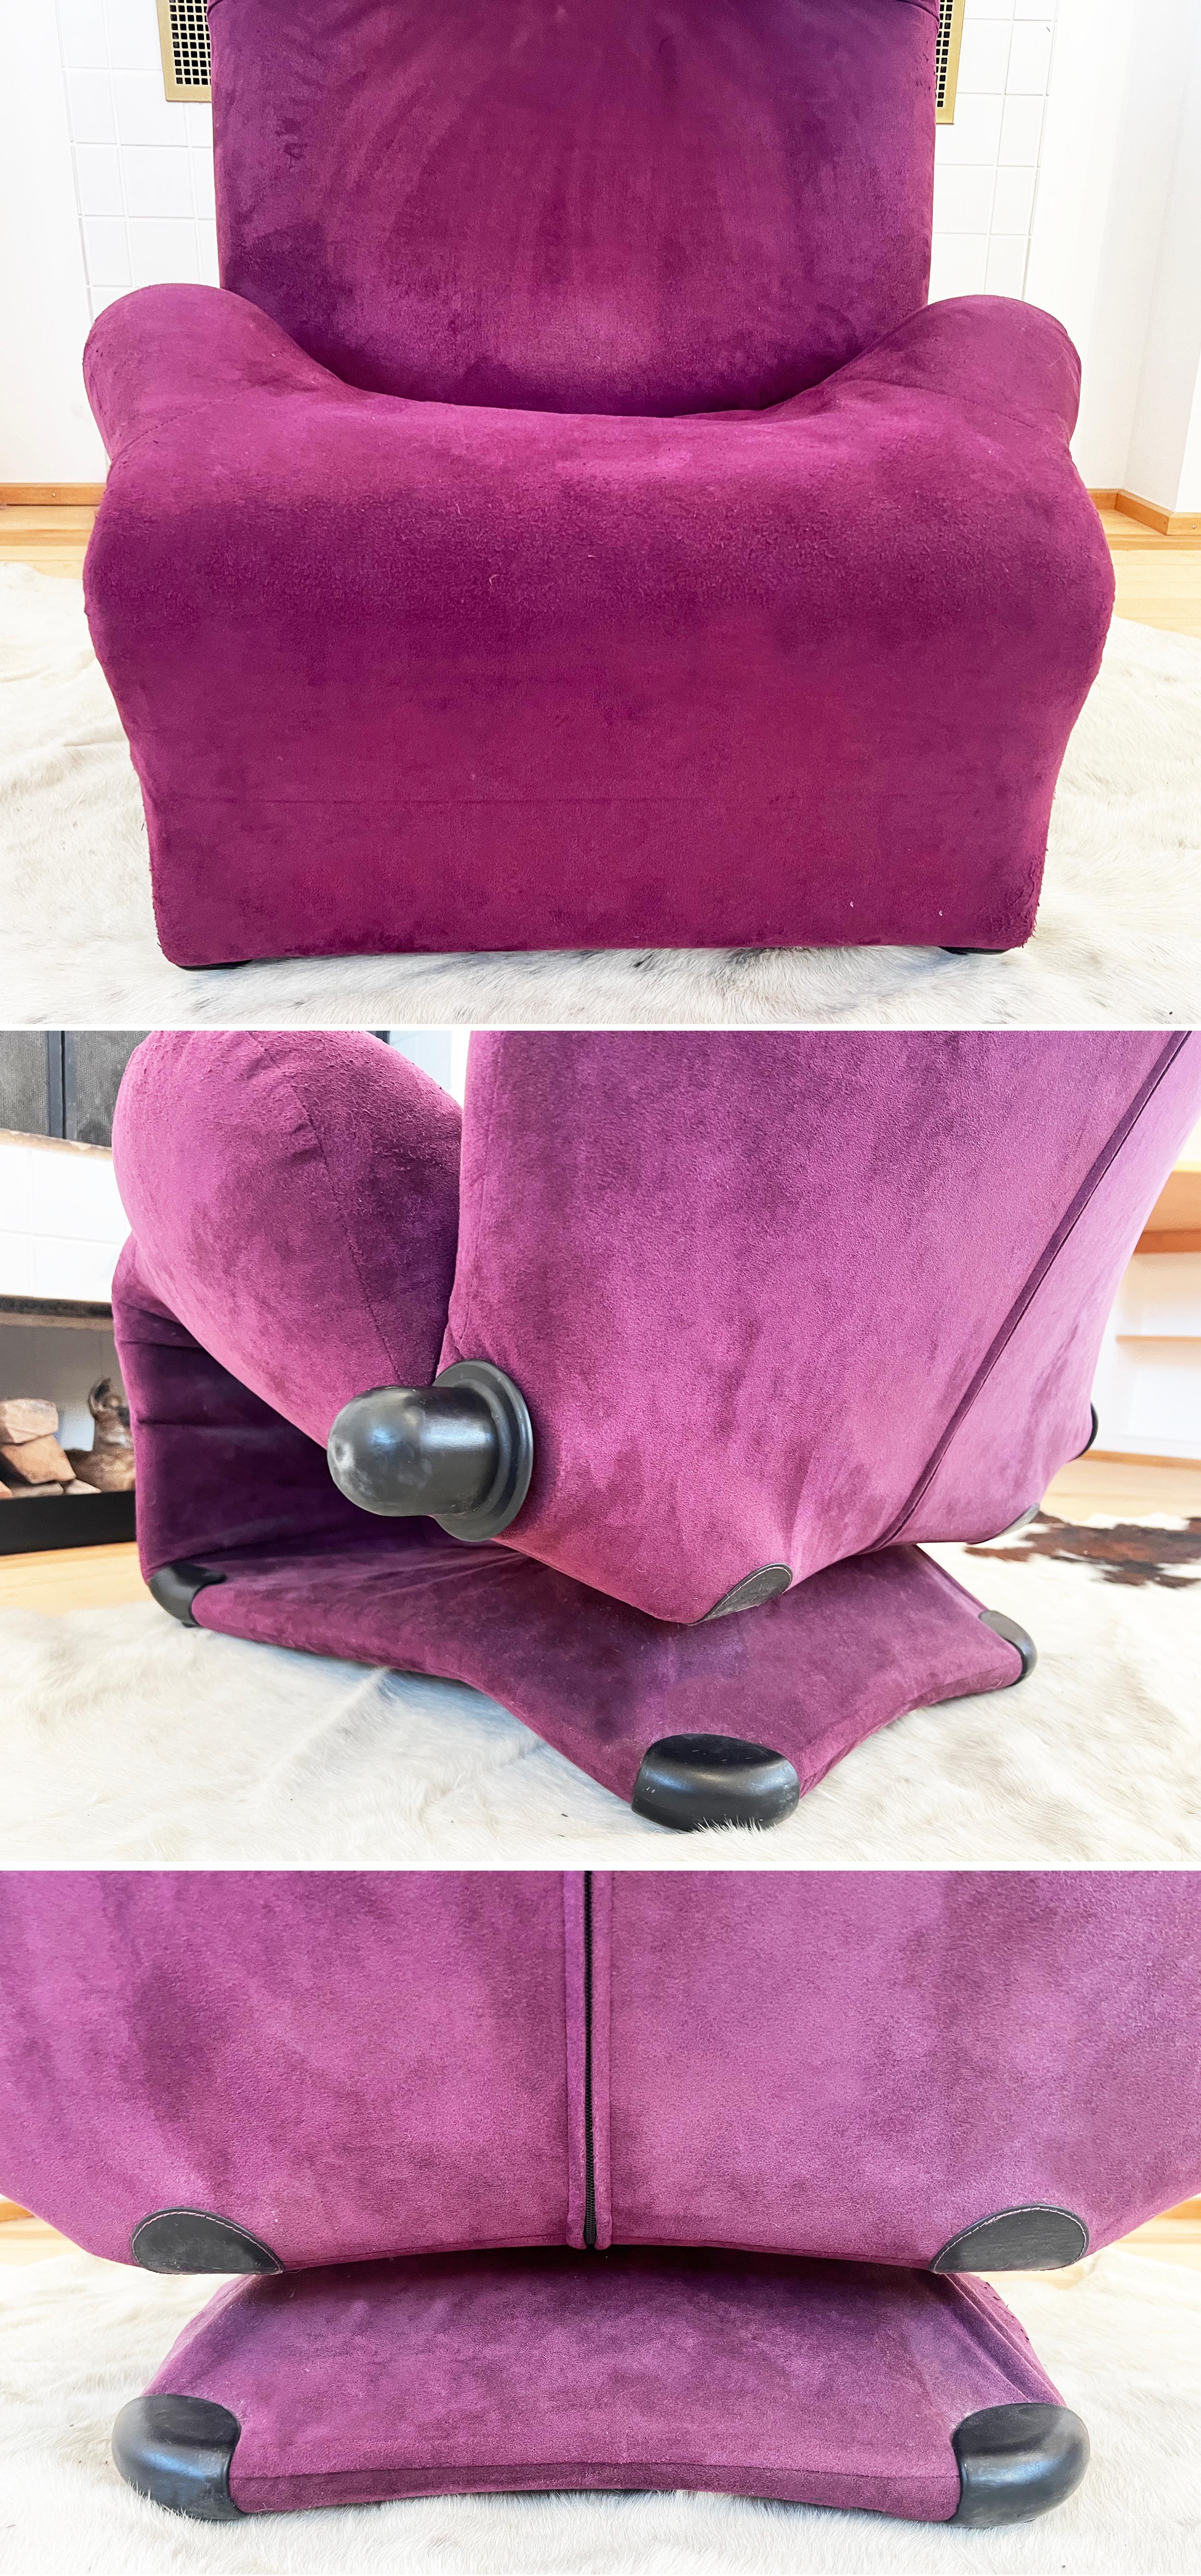 V.Cool Purple Suede Cassina 111 Wink Chaise Lounge by Toshiyuki Kita Japan Italy For Sale 5